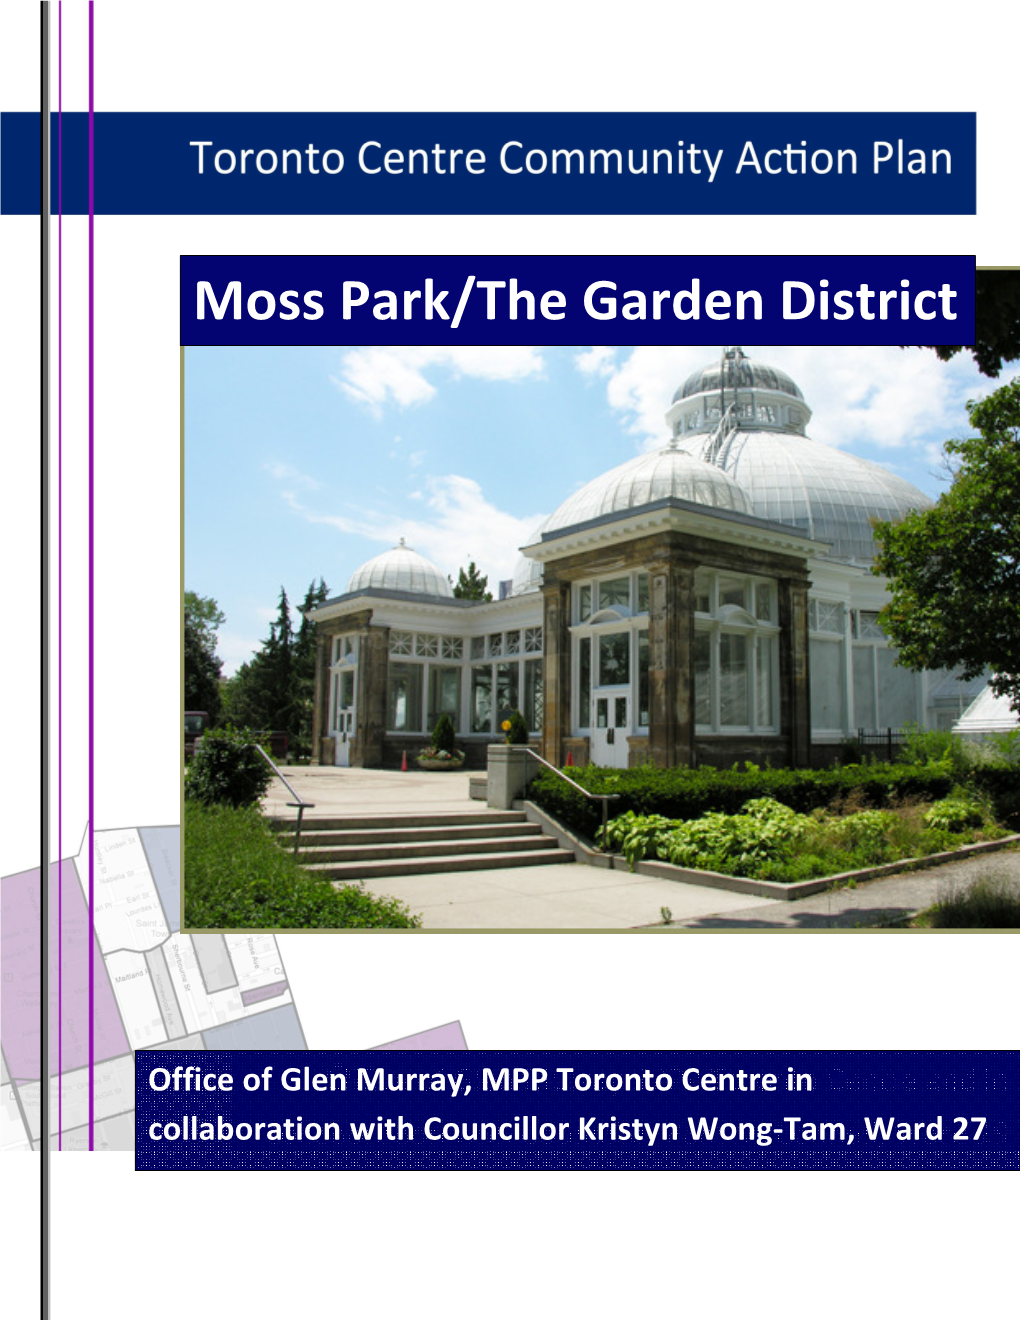 Toronto Centre Community Action Plan Looks to Provide a Vision for the Area Well Into the Next 10-15 Years